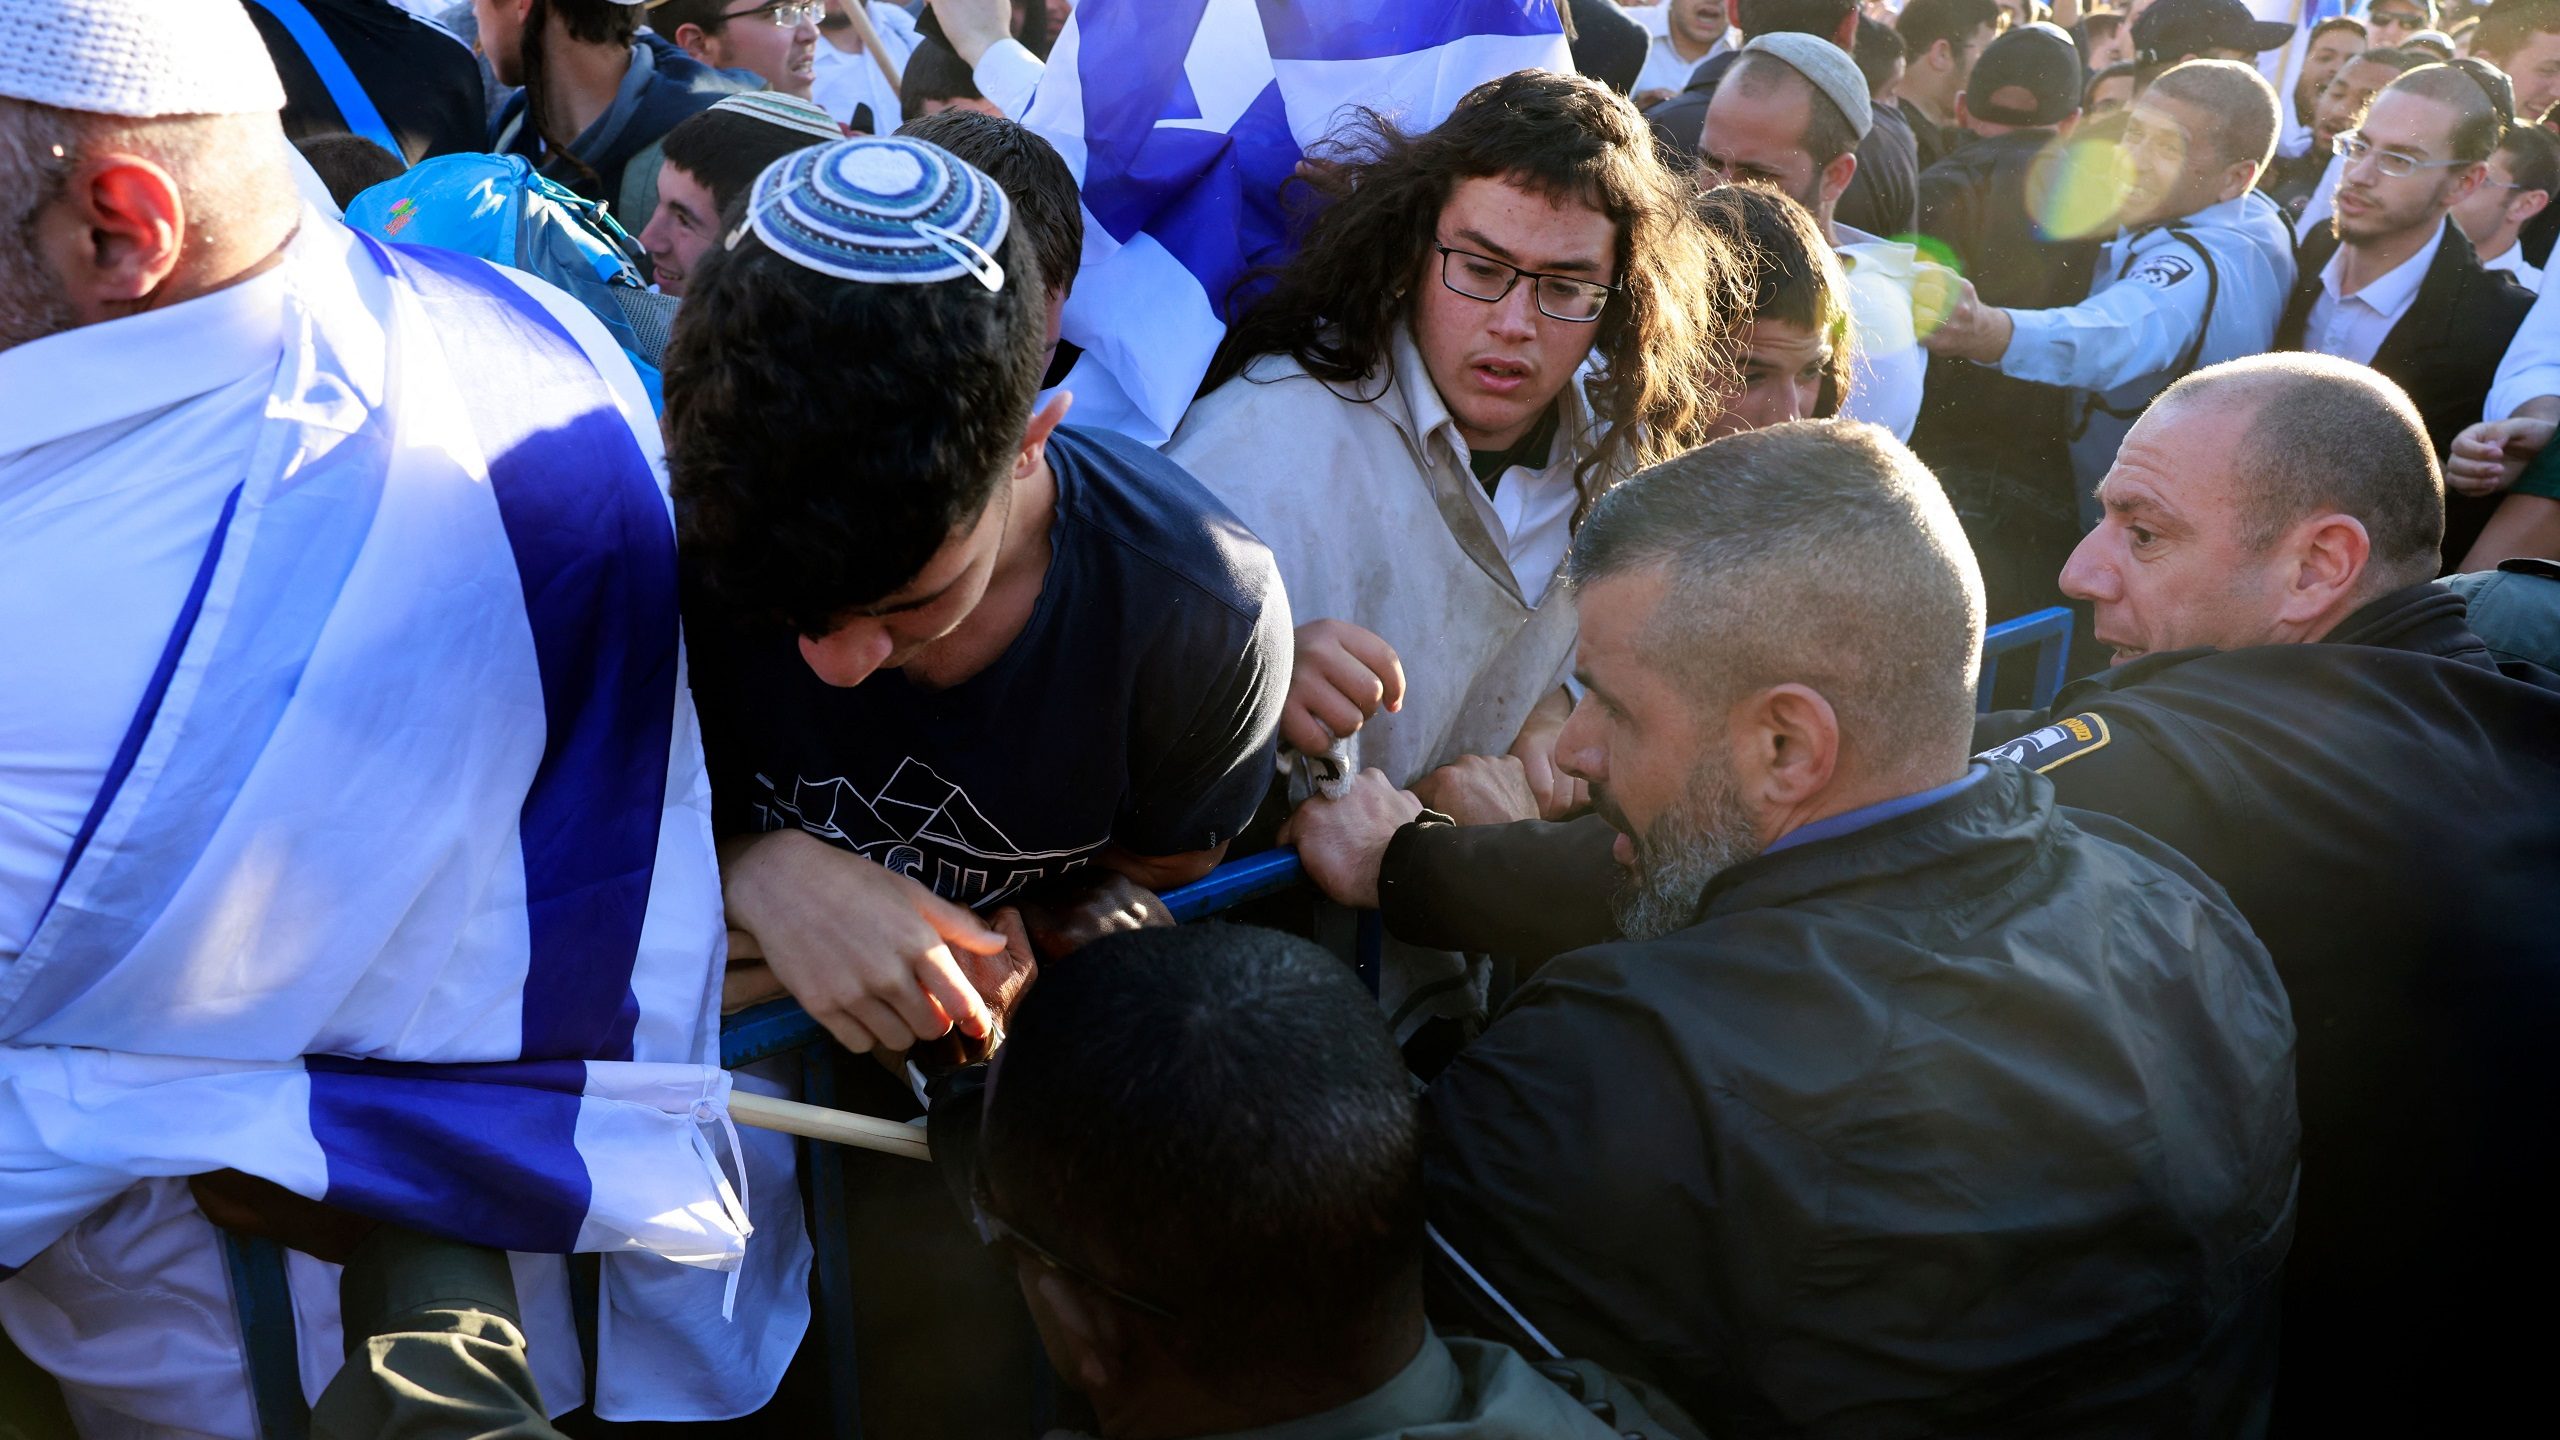 Fearing Provocation, Israel Police Stop Jewish March to Muslim Quarter